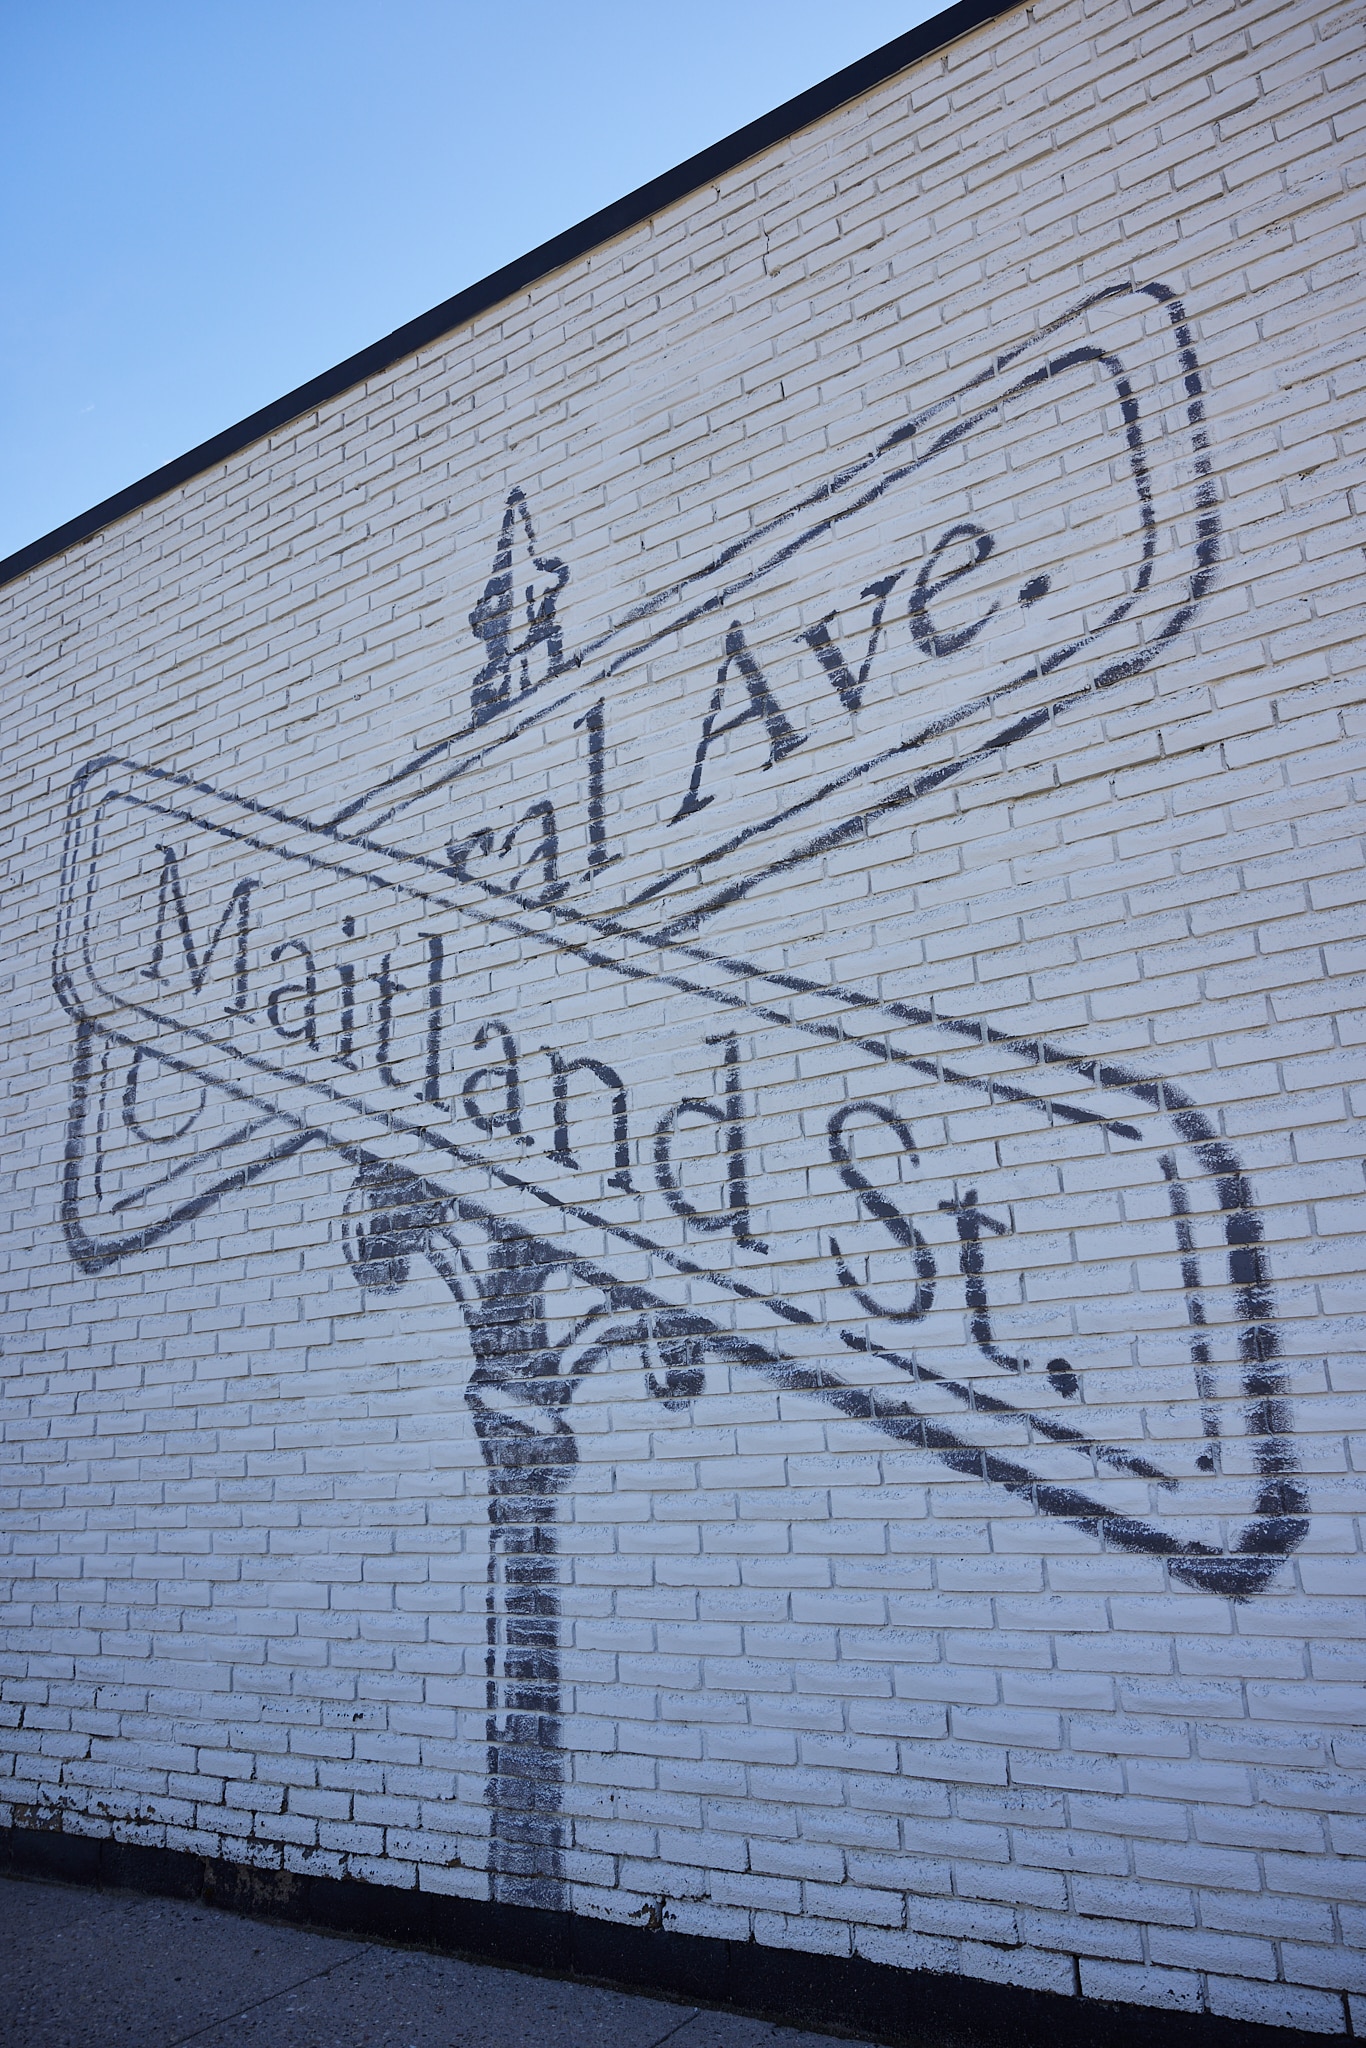 An image of a wall mural showing the two main street signs (Central Ave. & Maitland St.) across from the Ford Keast LLP office.